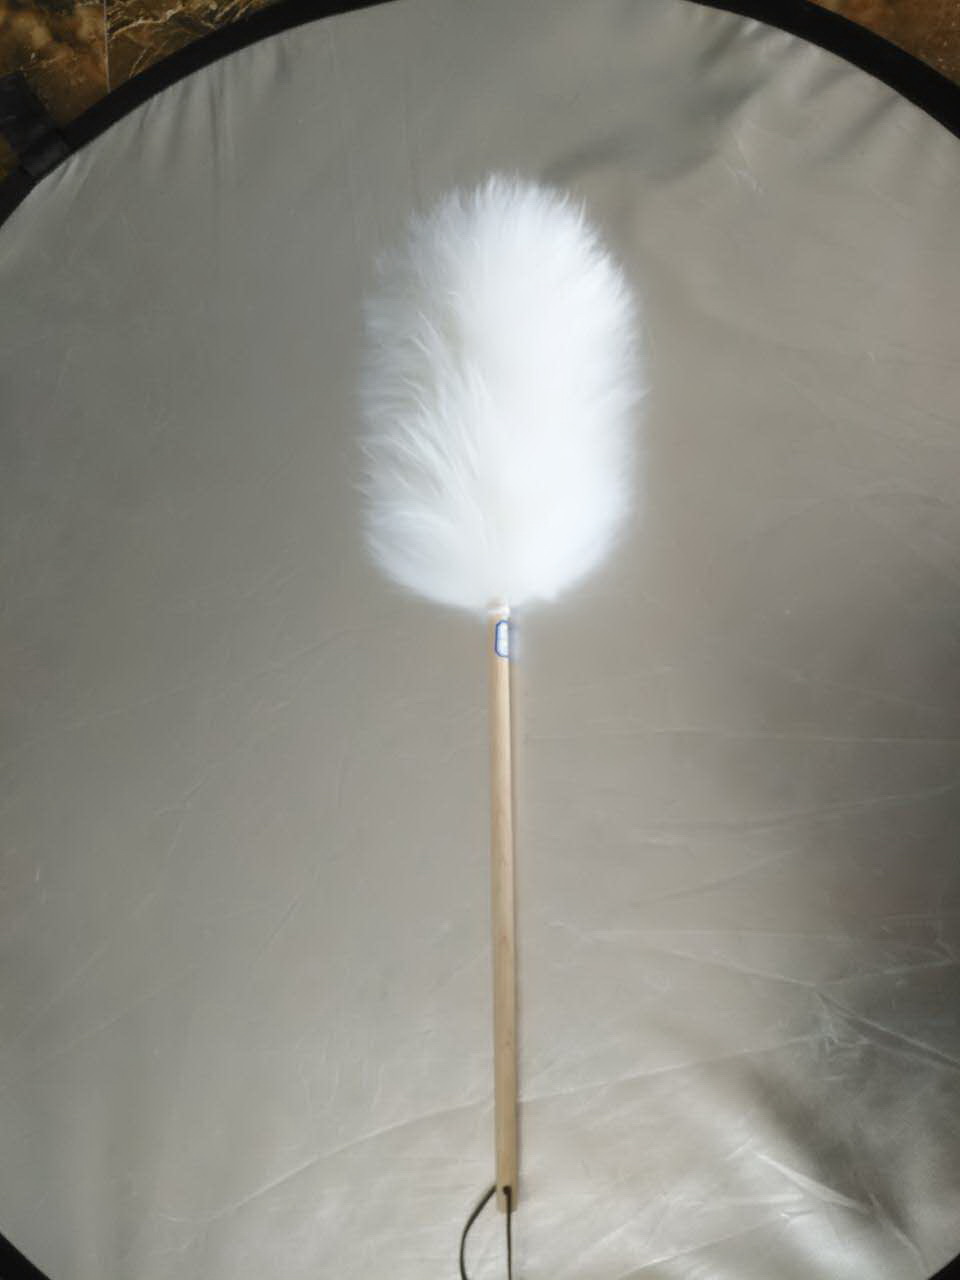 Wool duster item No.:WLY06